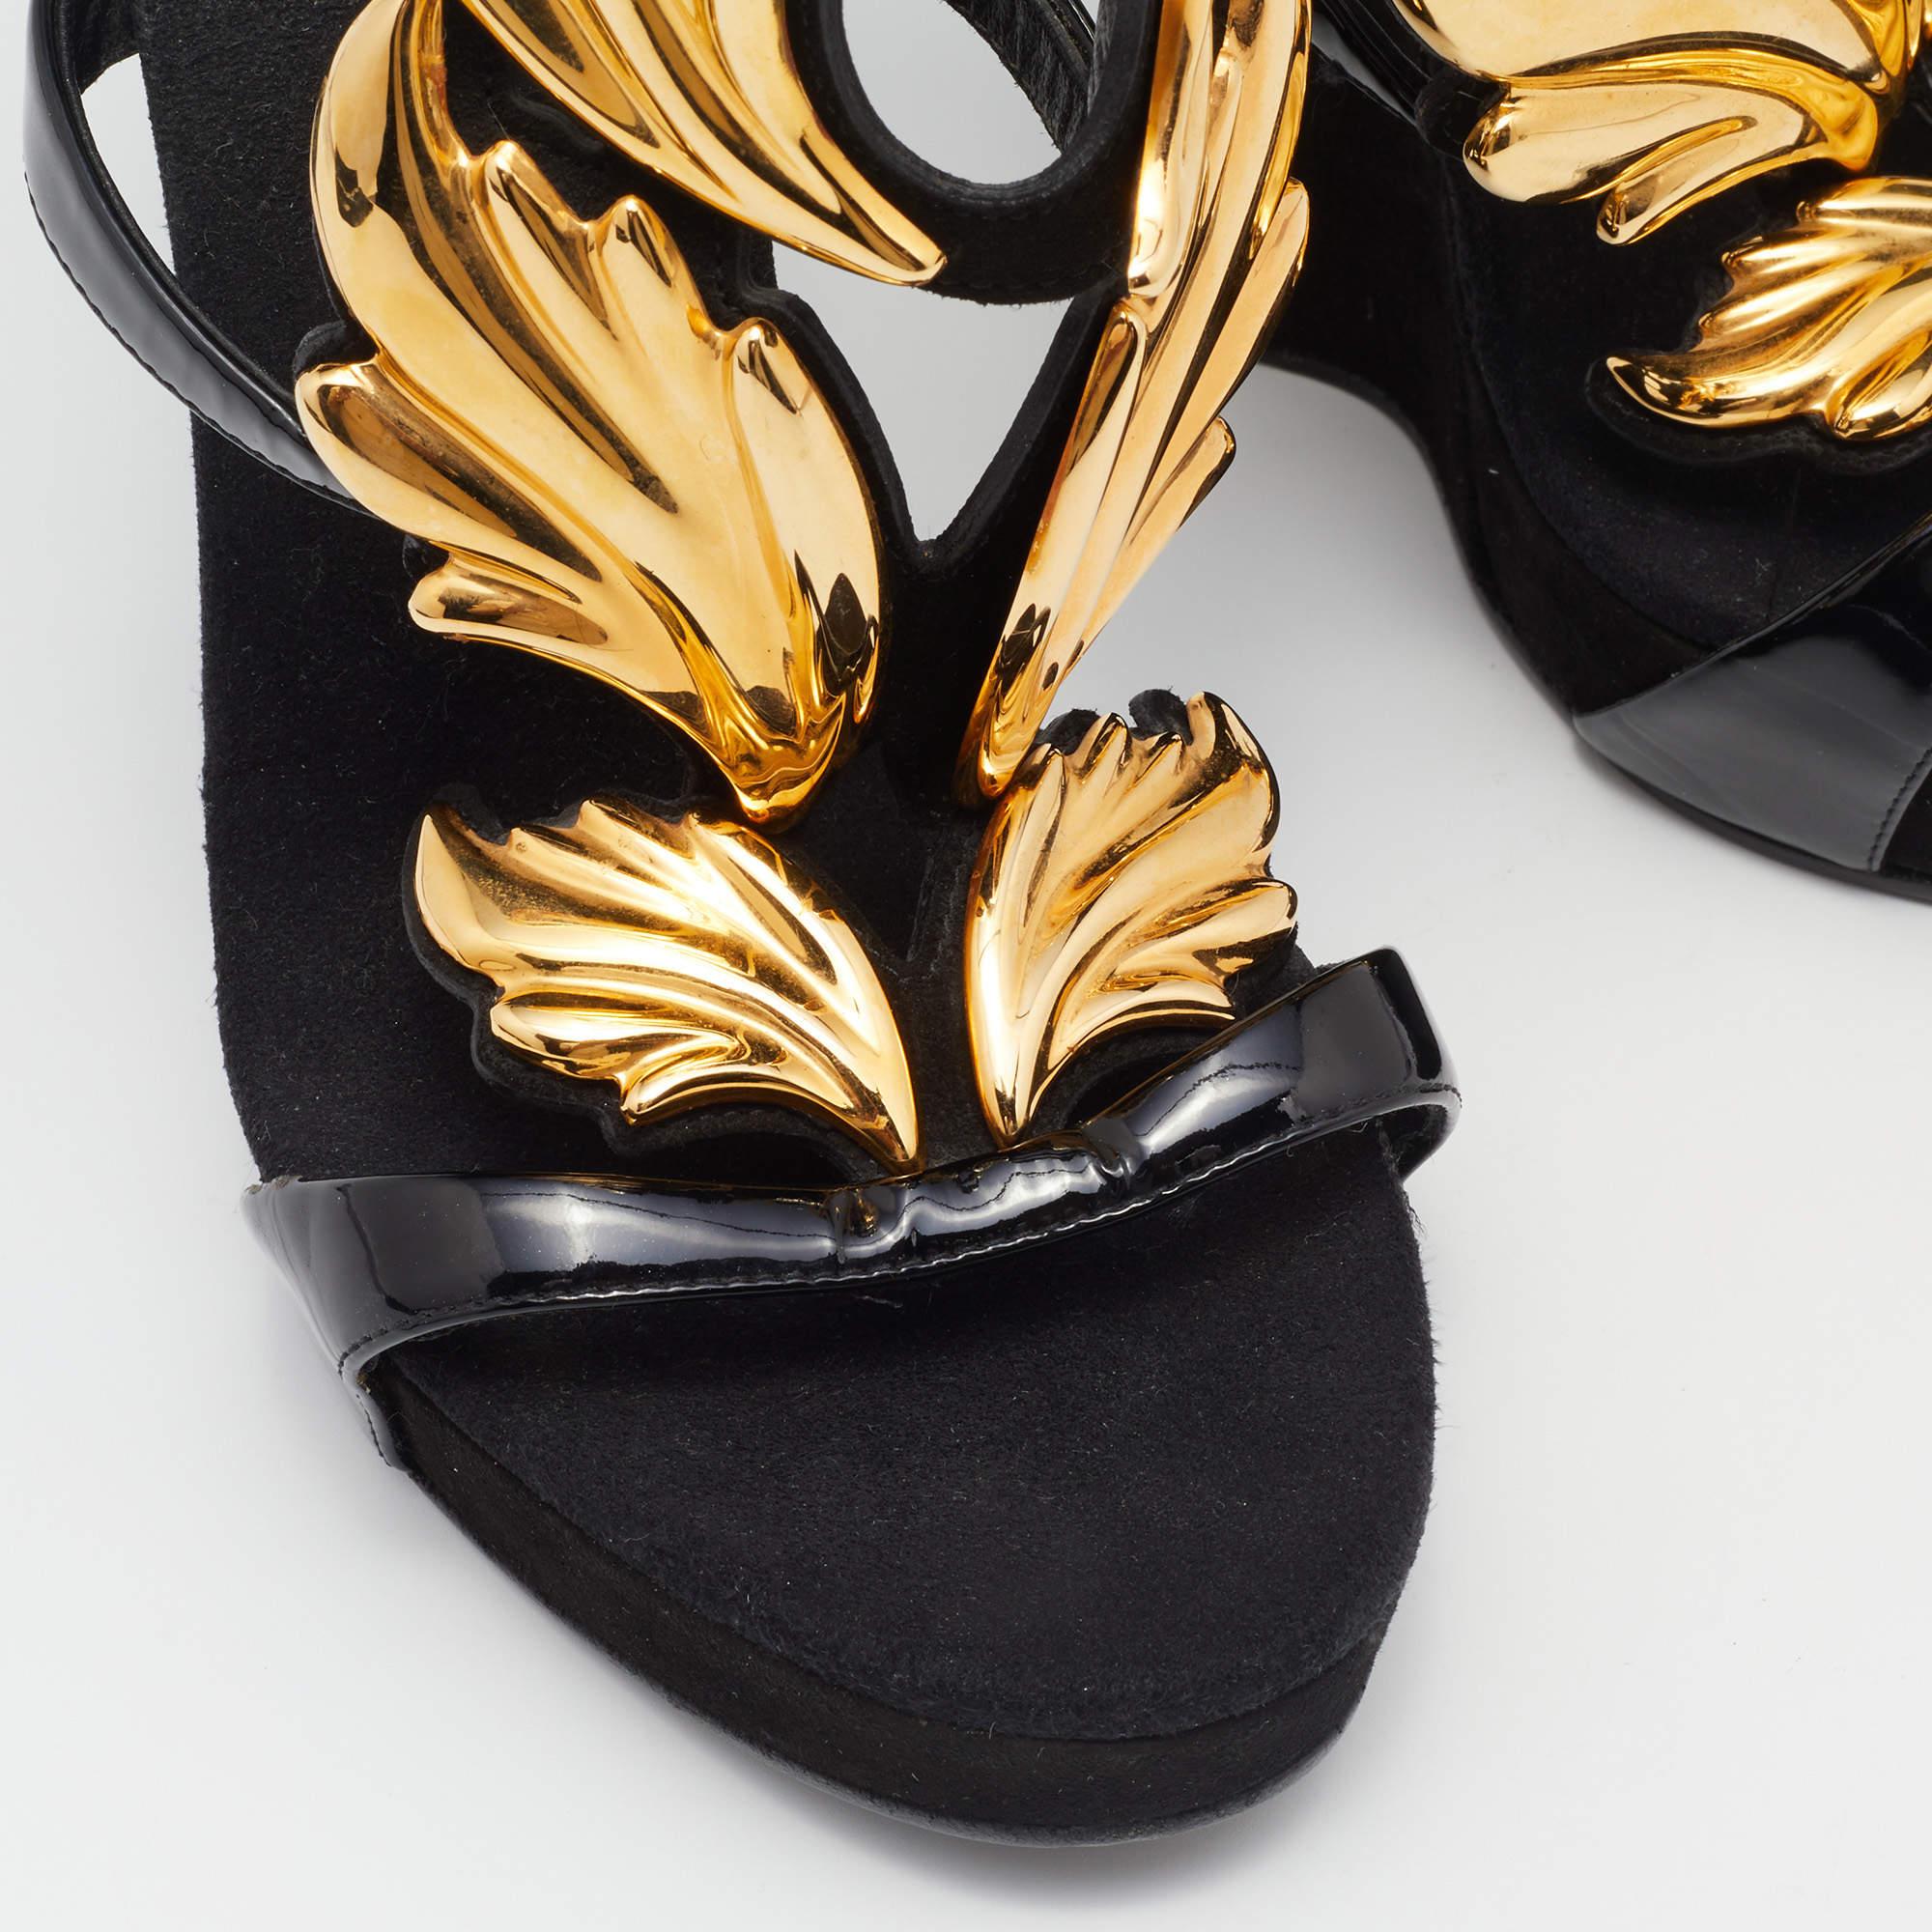 Giuseppe Zanotti Black/Gold Patent Leather and Suede Cruel Summer Sandals Size 3 2